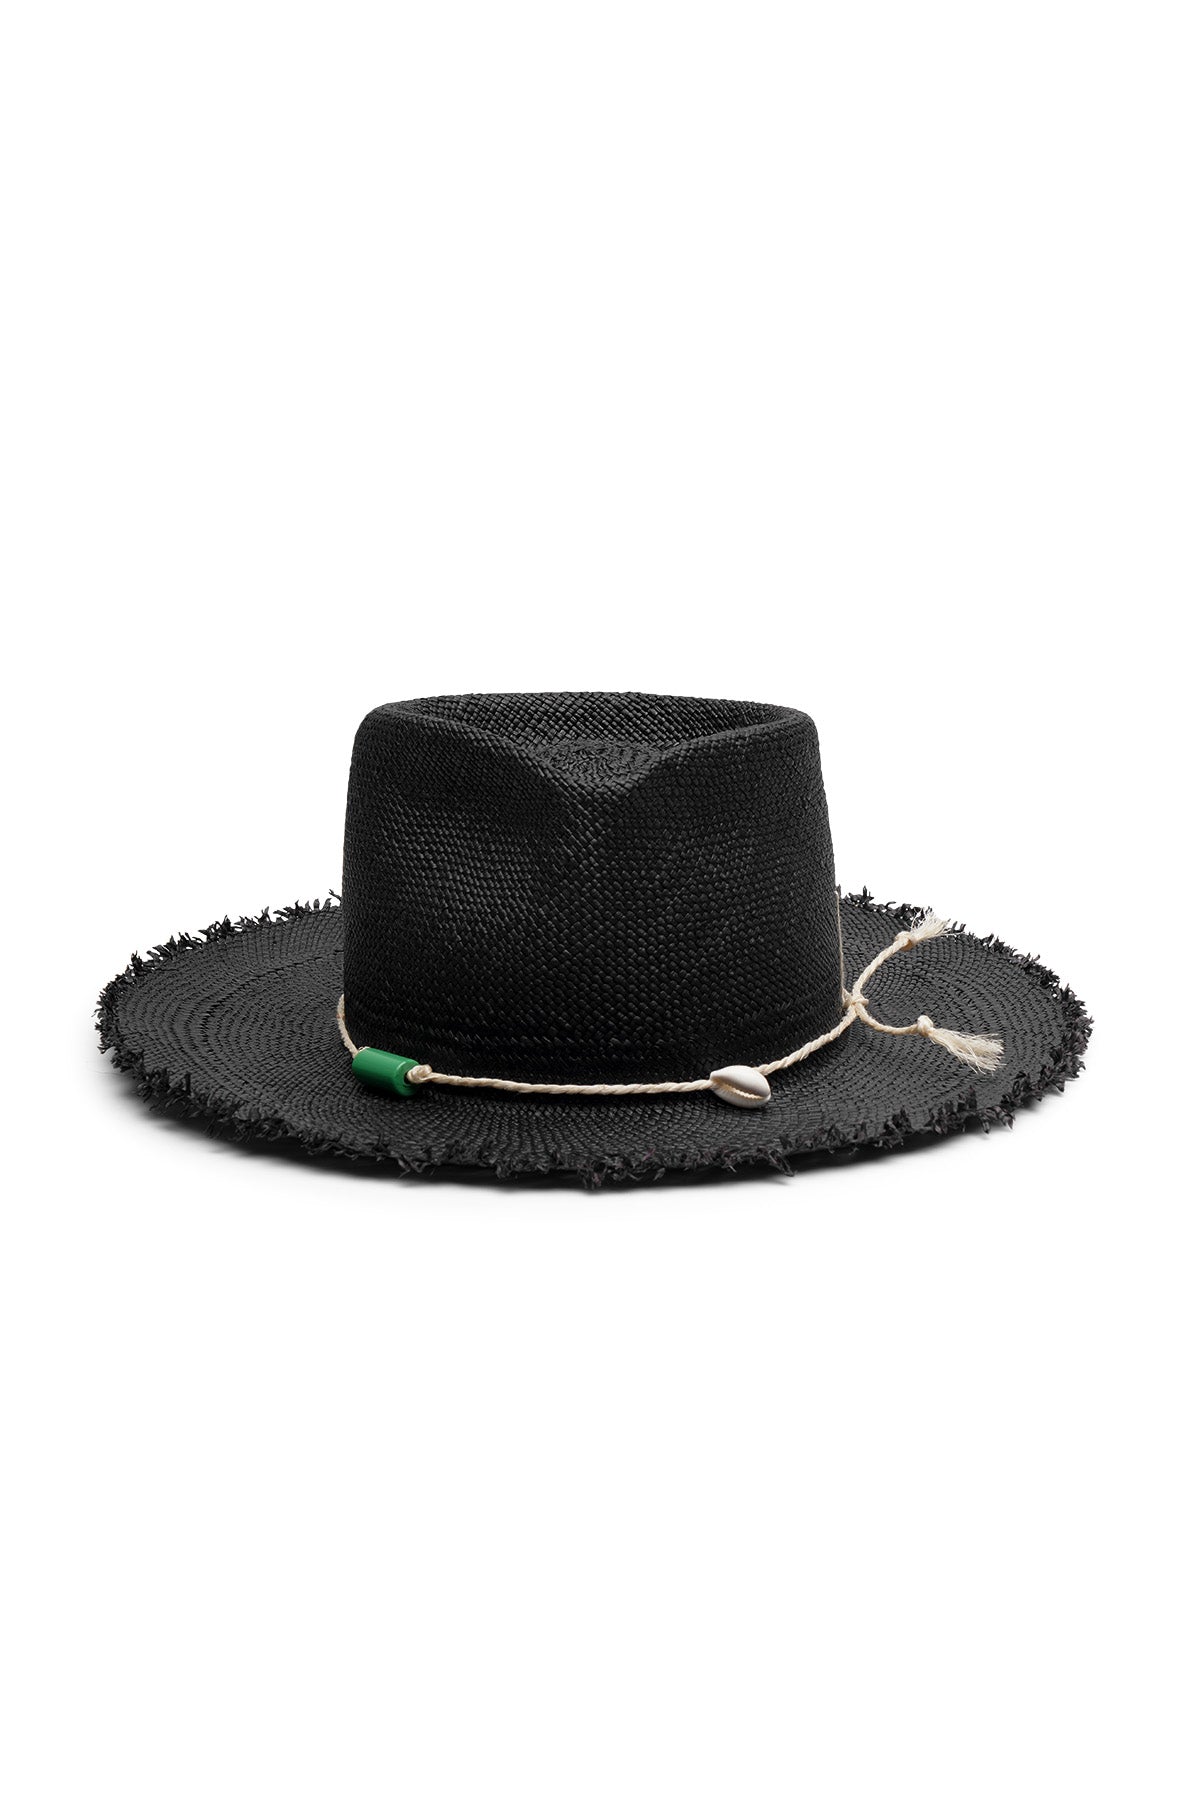 Black straw fedora hat style with a wide brim, frayed edges, and teardrop crease. Tied rope with beads and seashell detail. Unisex hat style in various sizes and colors. We ship worldwide. Shop now. Each SoonNoon hat is handmade with unique character in Stockholm, Sweden.